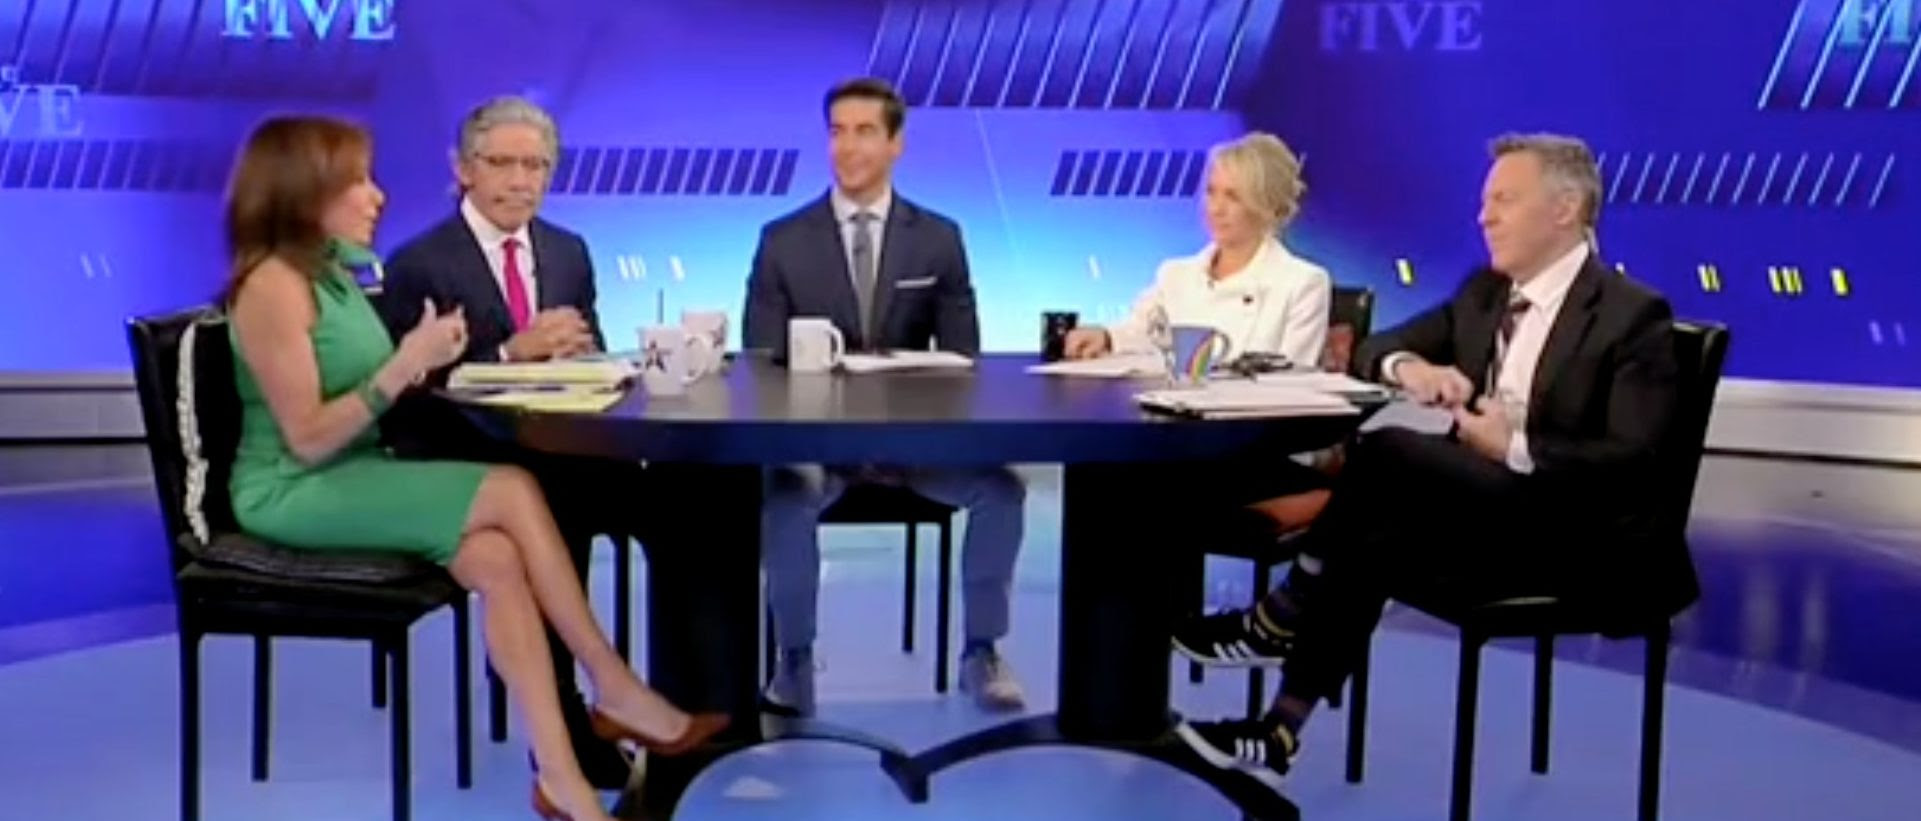 ‘They’re Going To Continue To Lose’: ‘The Five’ Panel Reacts To Pelosi Still Pushing For Build Back Better Agenda